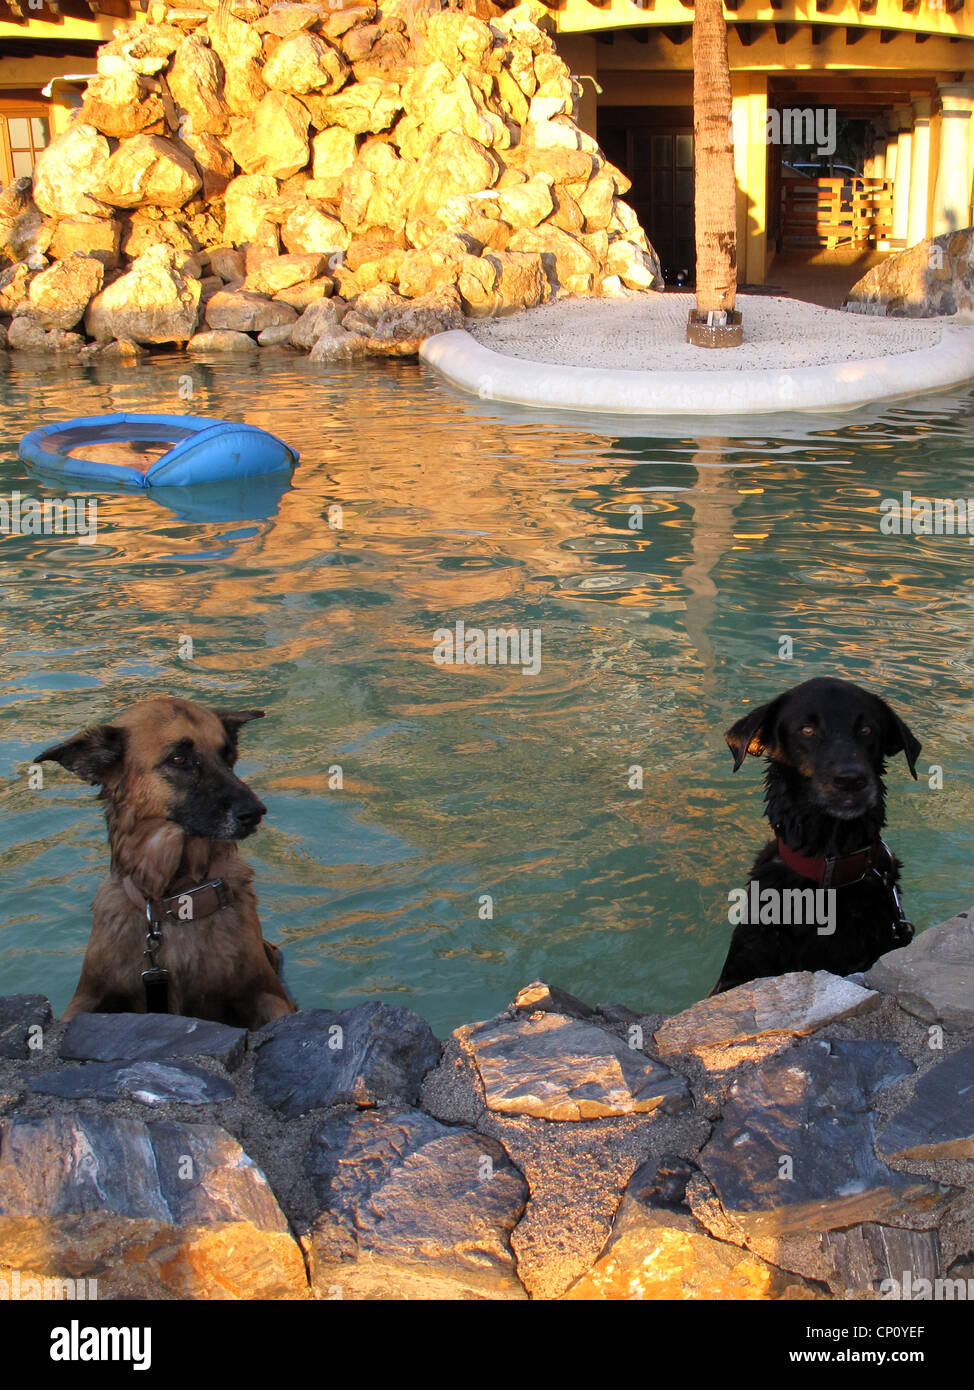 Two dogs posing in a pool. Stock Photo